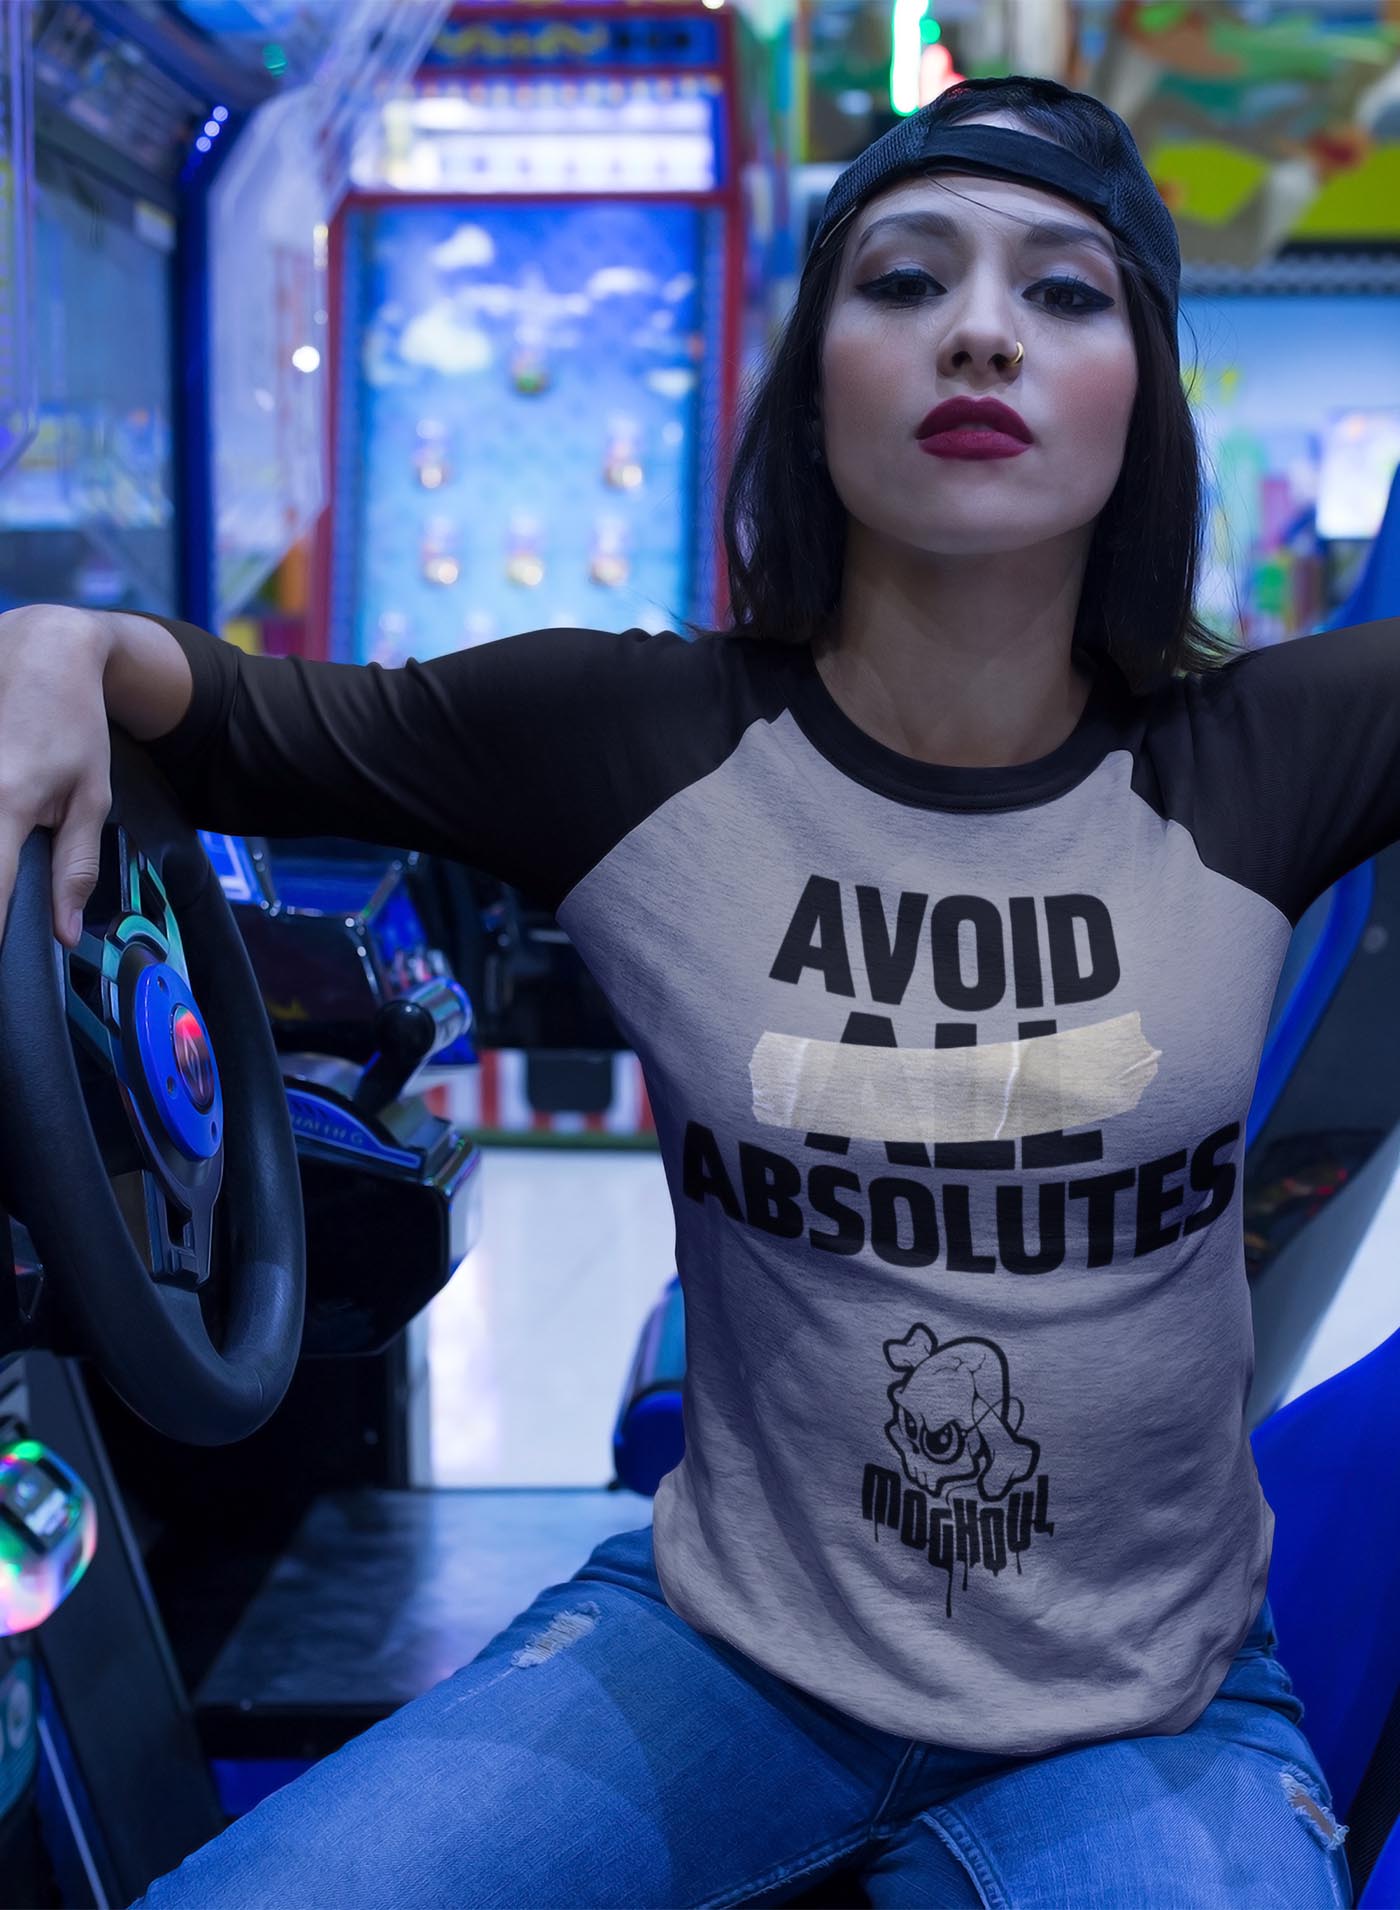 man modeling a Heather grey unisex reglan t-shirt featuring the paradoxical phrase "avoid all absolutes" and the moghoul logo.